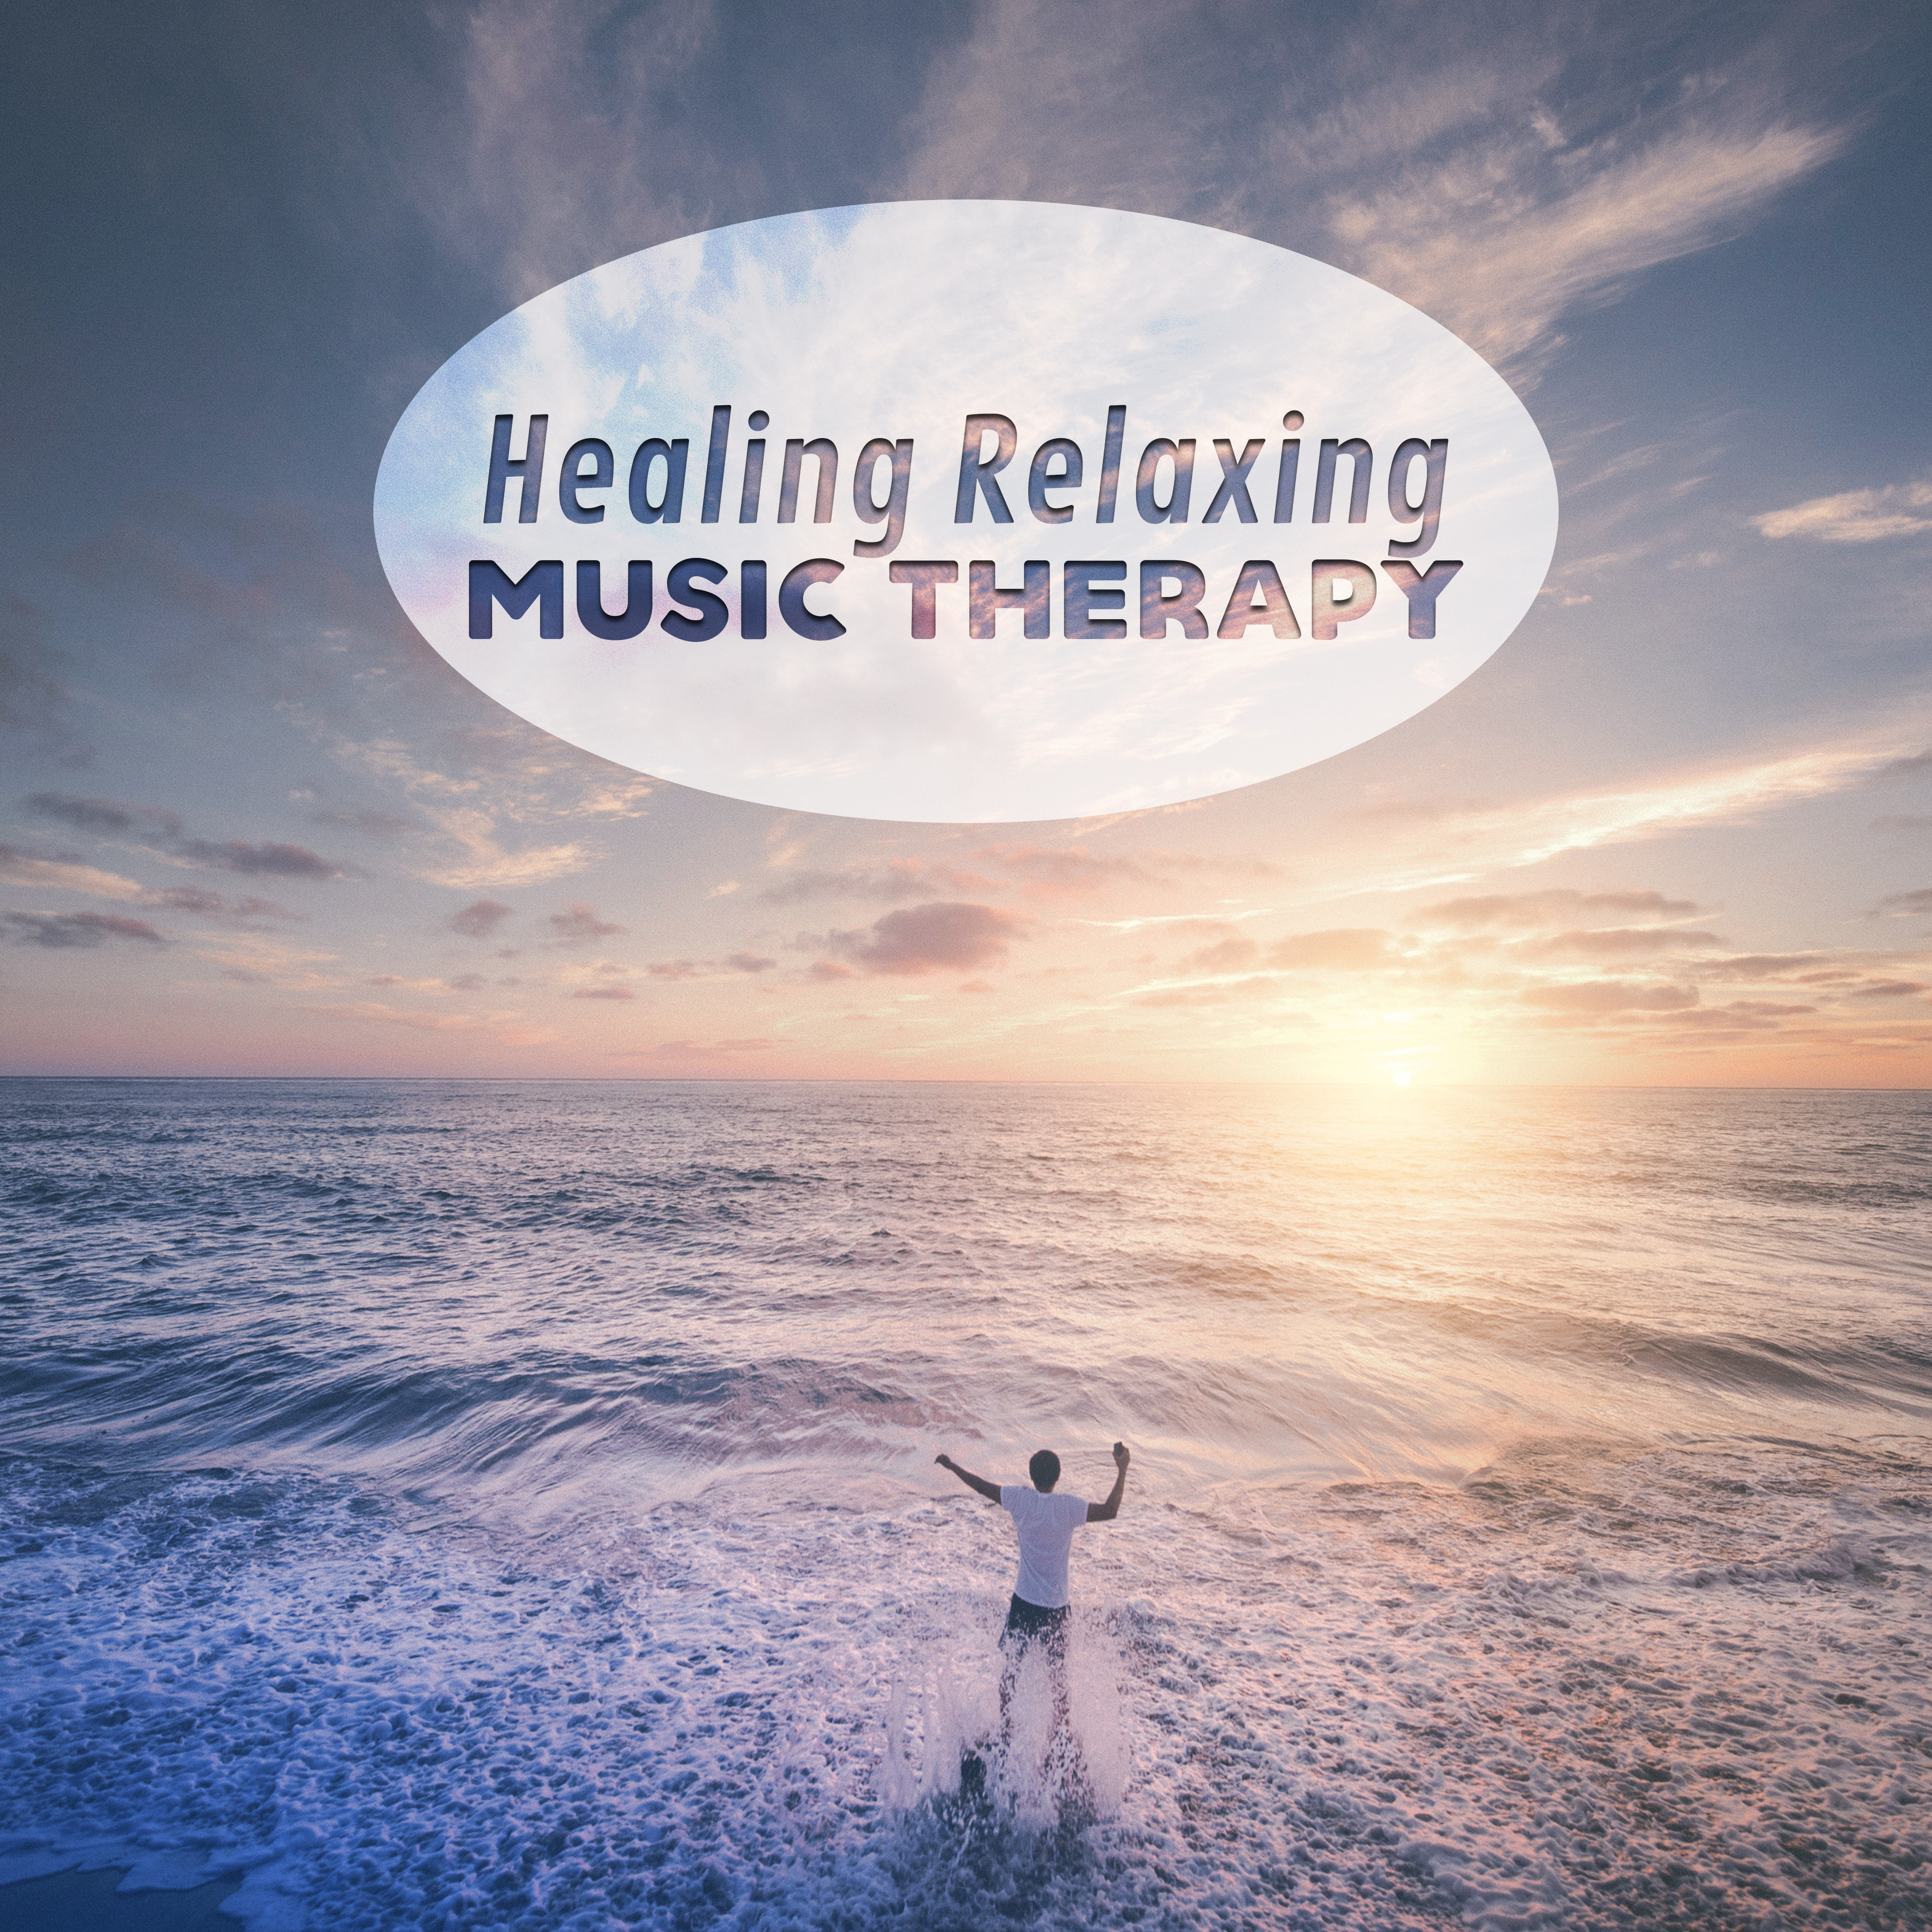 Healing Relaxing Music Therapy – Pure New Age Music, Nature Sounds, Rest, Relax 2017